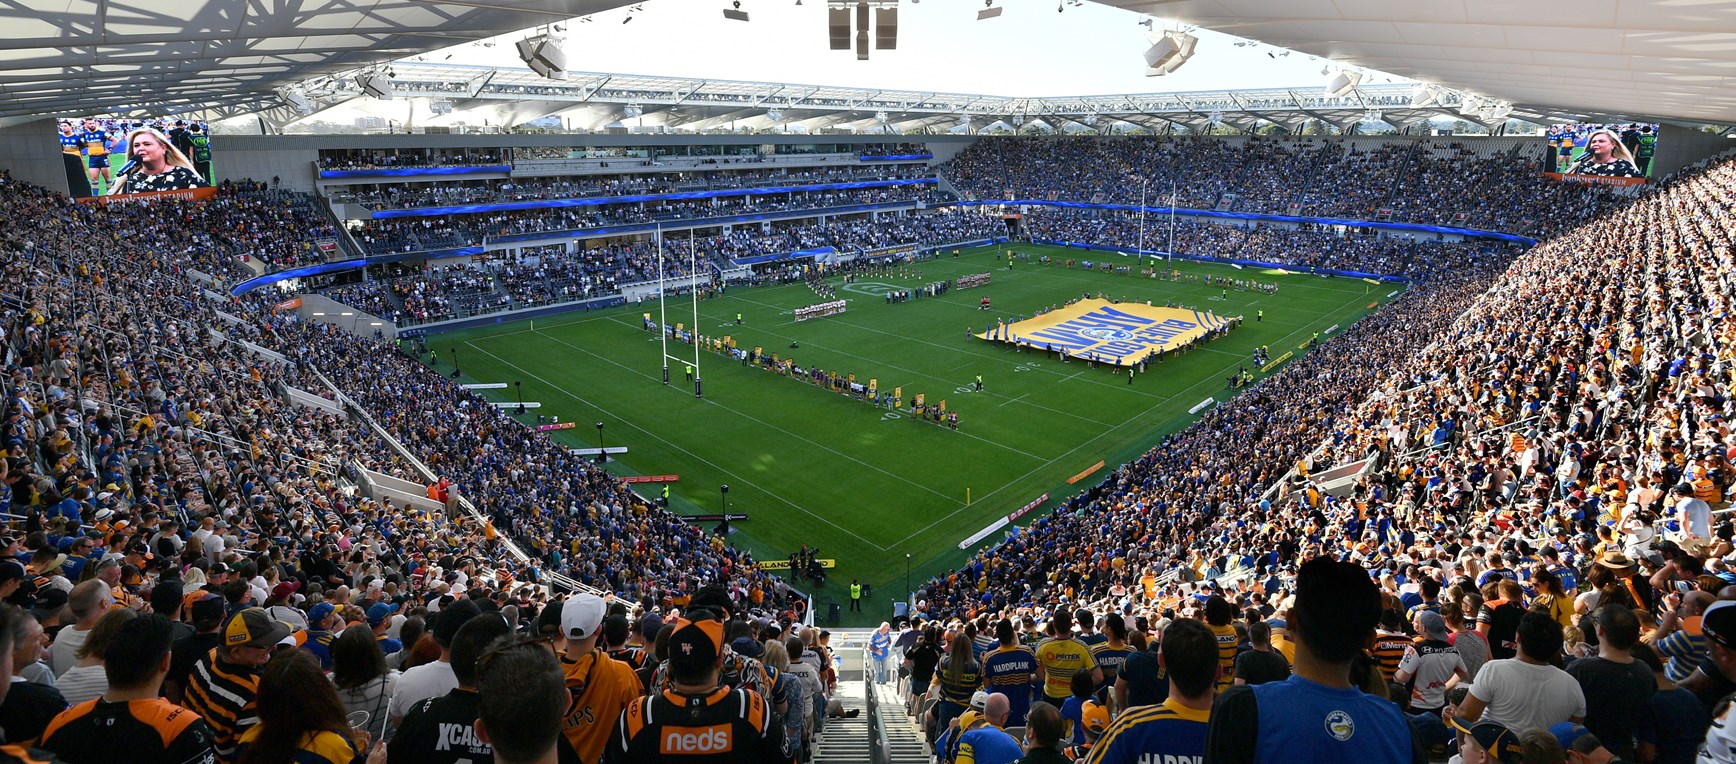 Eels v Wests Tigers - Around the Grounds